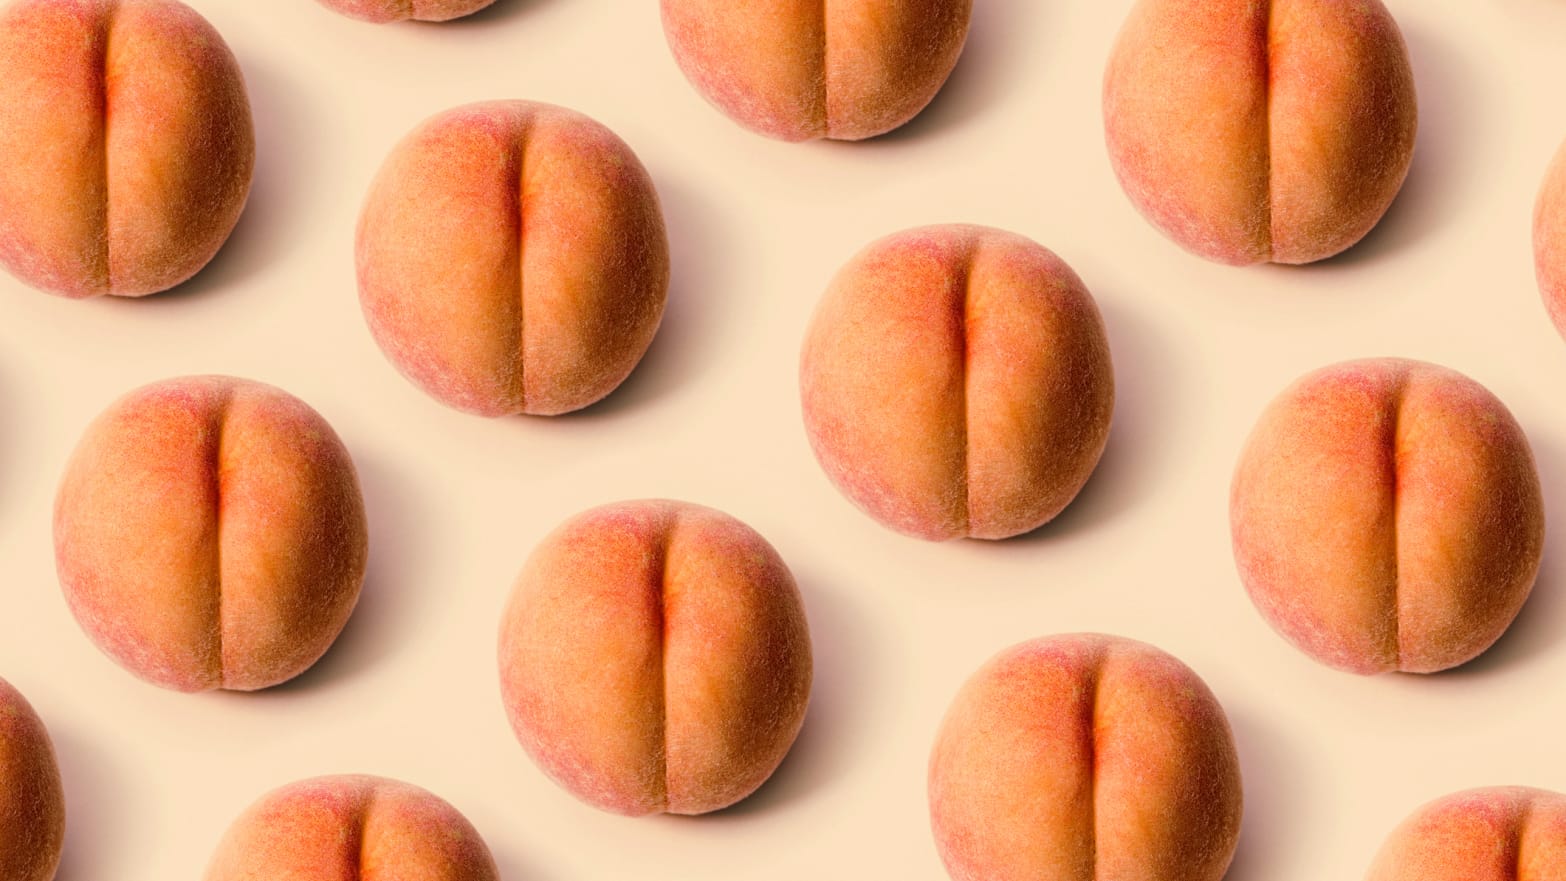 A photo of rows of peaches against a peach-colored background.